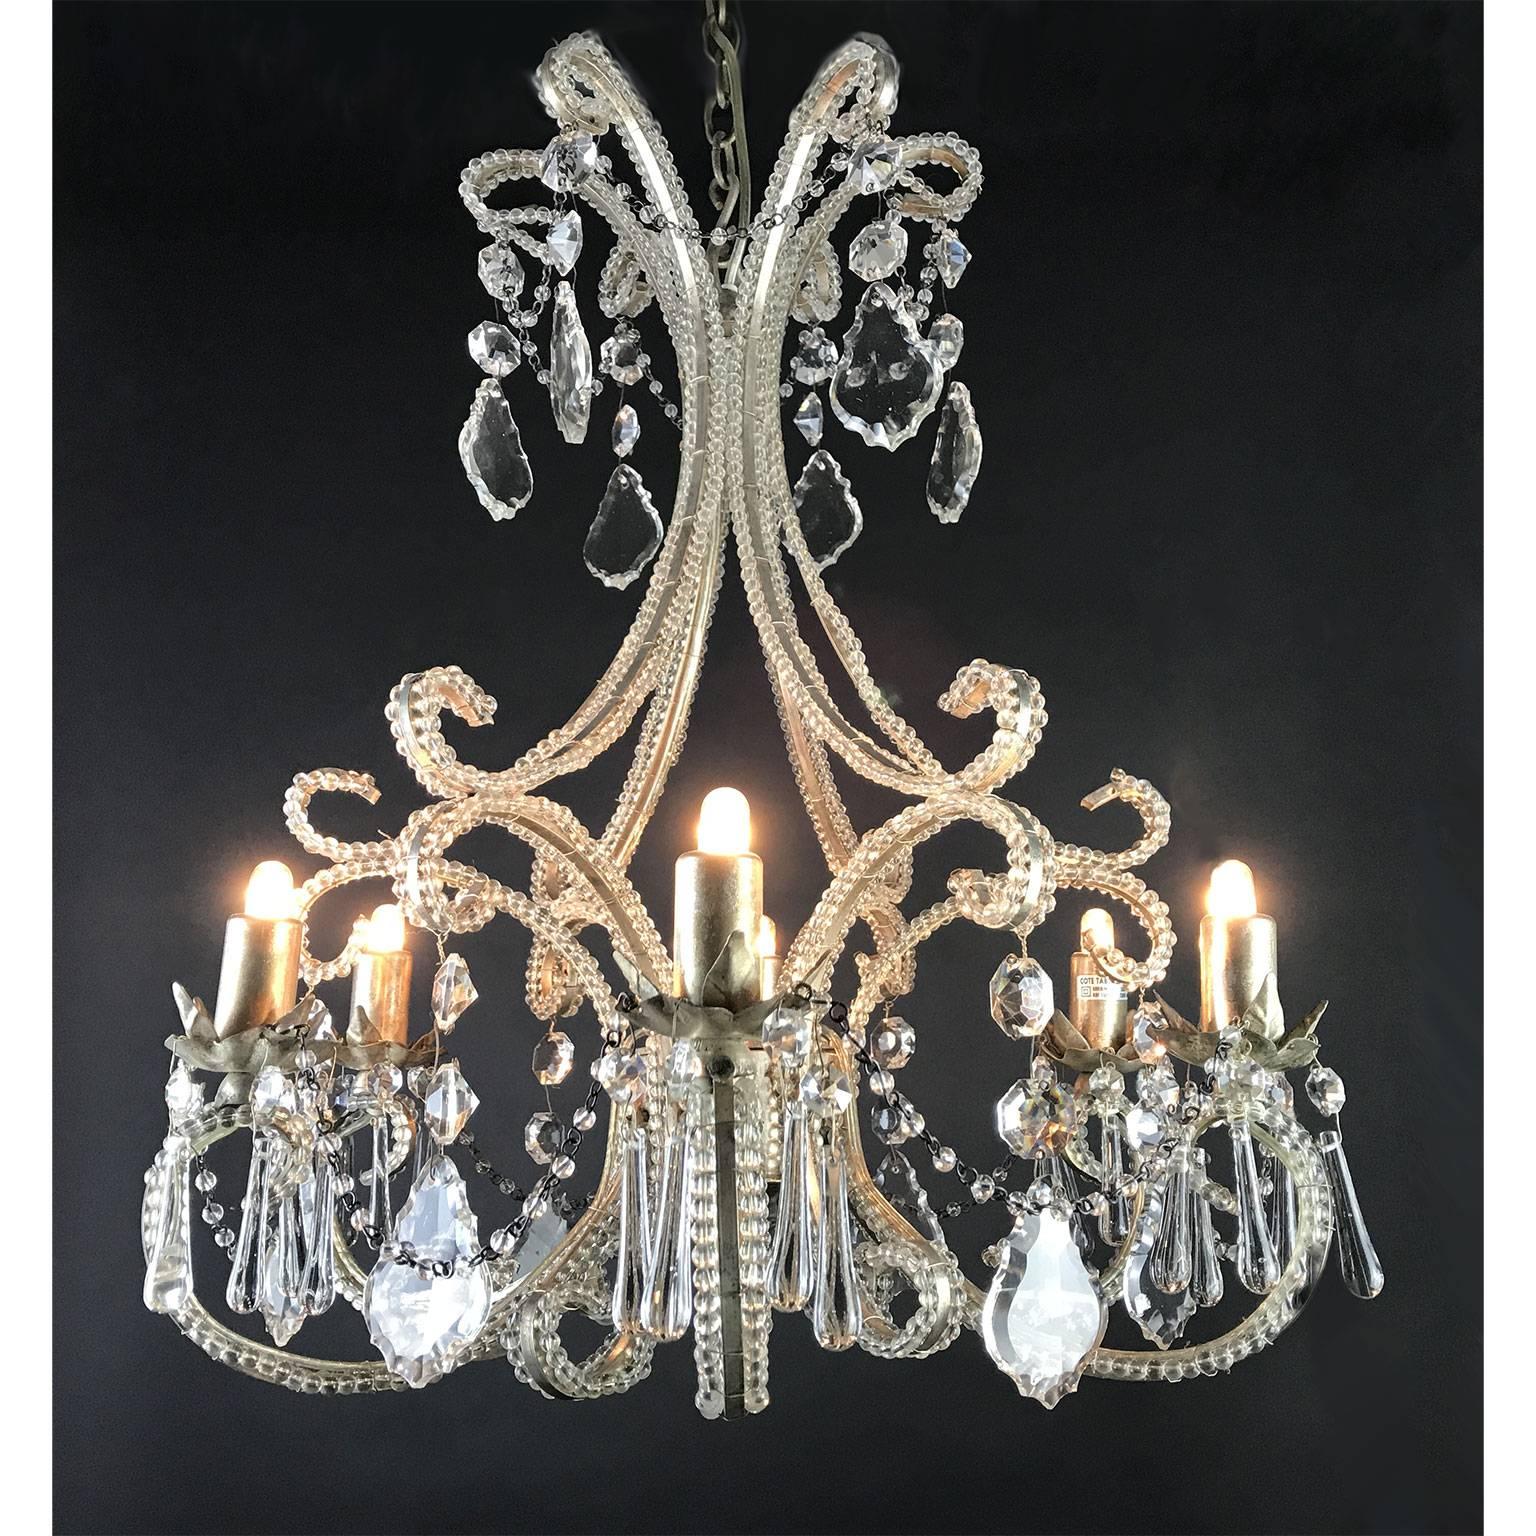 20th century Italian beaded crystal six-light basket chandelier, a lovely and romantic chandelier squared brass structure, with silvered finish.
Six curved double beaded crystals arms ending with original flower shaped silvered brass bobeiges. Arms